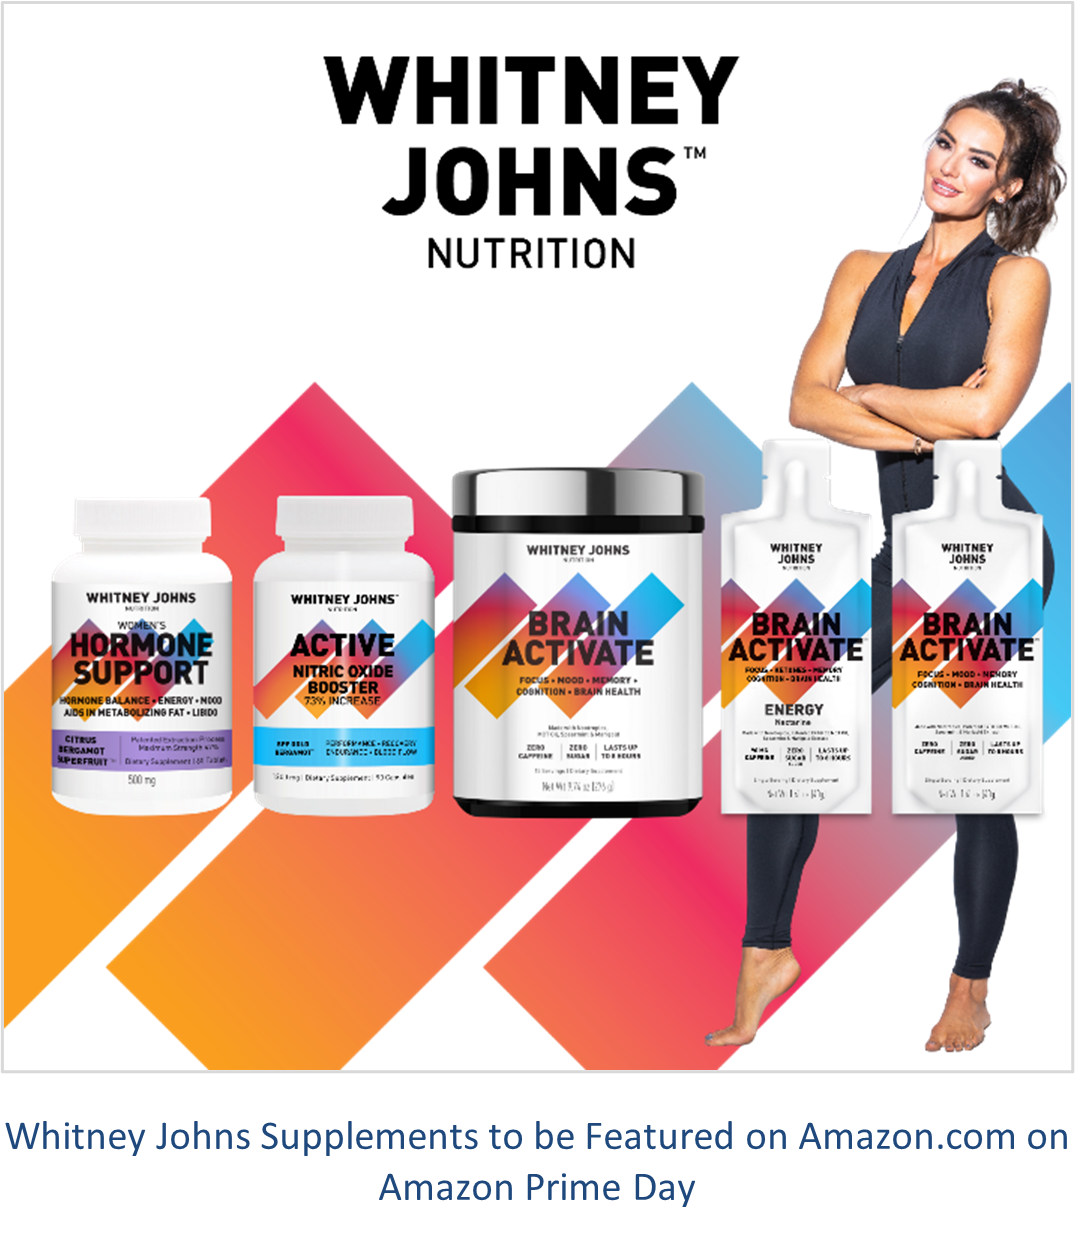 Whitney Johns Supplements to be Featured on Amazon.com on Amazon Prime Day